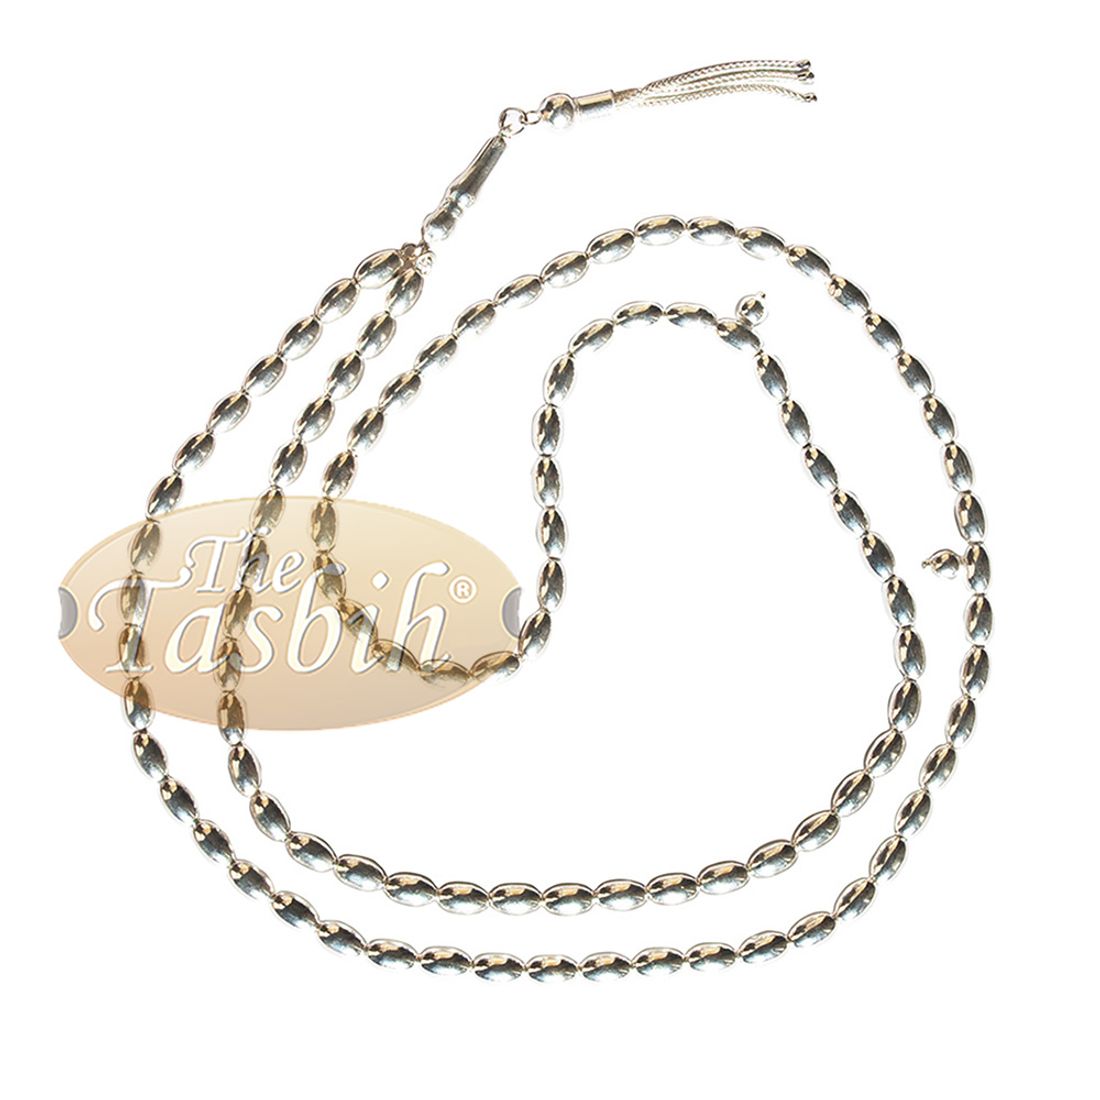 Sterling Silver 5mm Prayer Beads 99 Plain Oval Beads with 2 Dividers